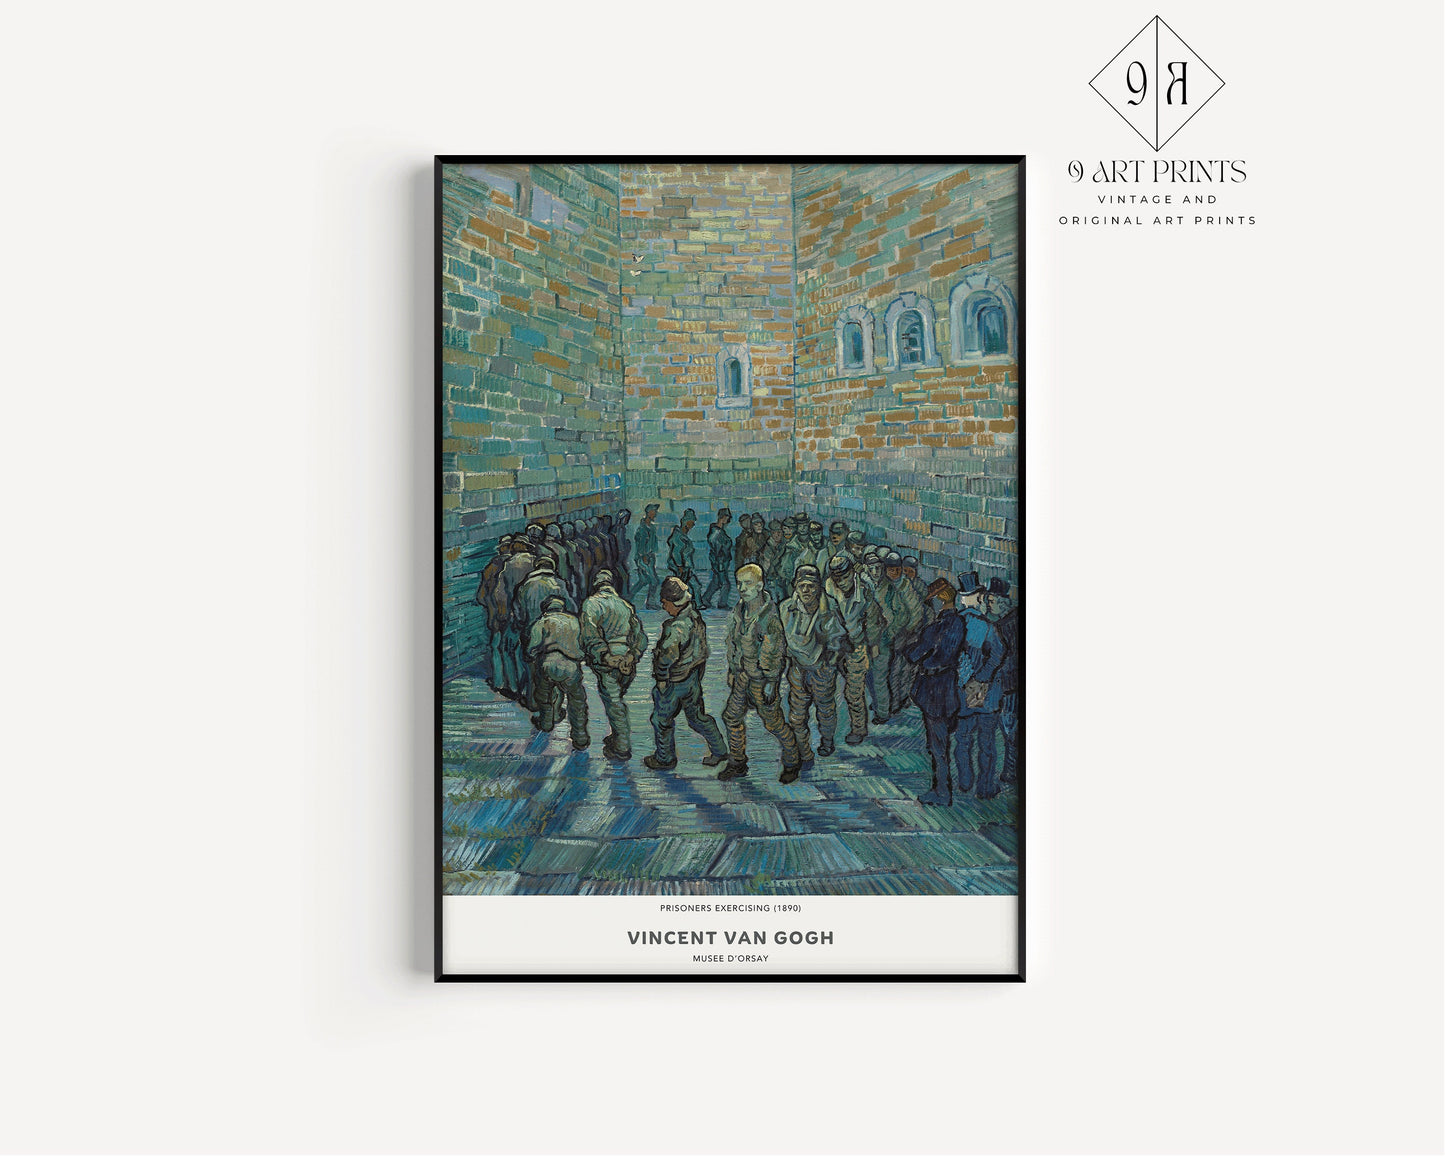 Van Gogh Prisoners Exercising Exhibition Museum Poster Fine Art Painting Vintage Famous Ready to hang Framed Home Office Decor Gift Idea